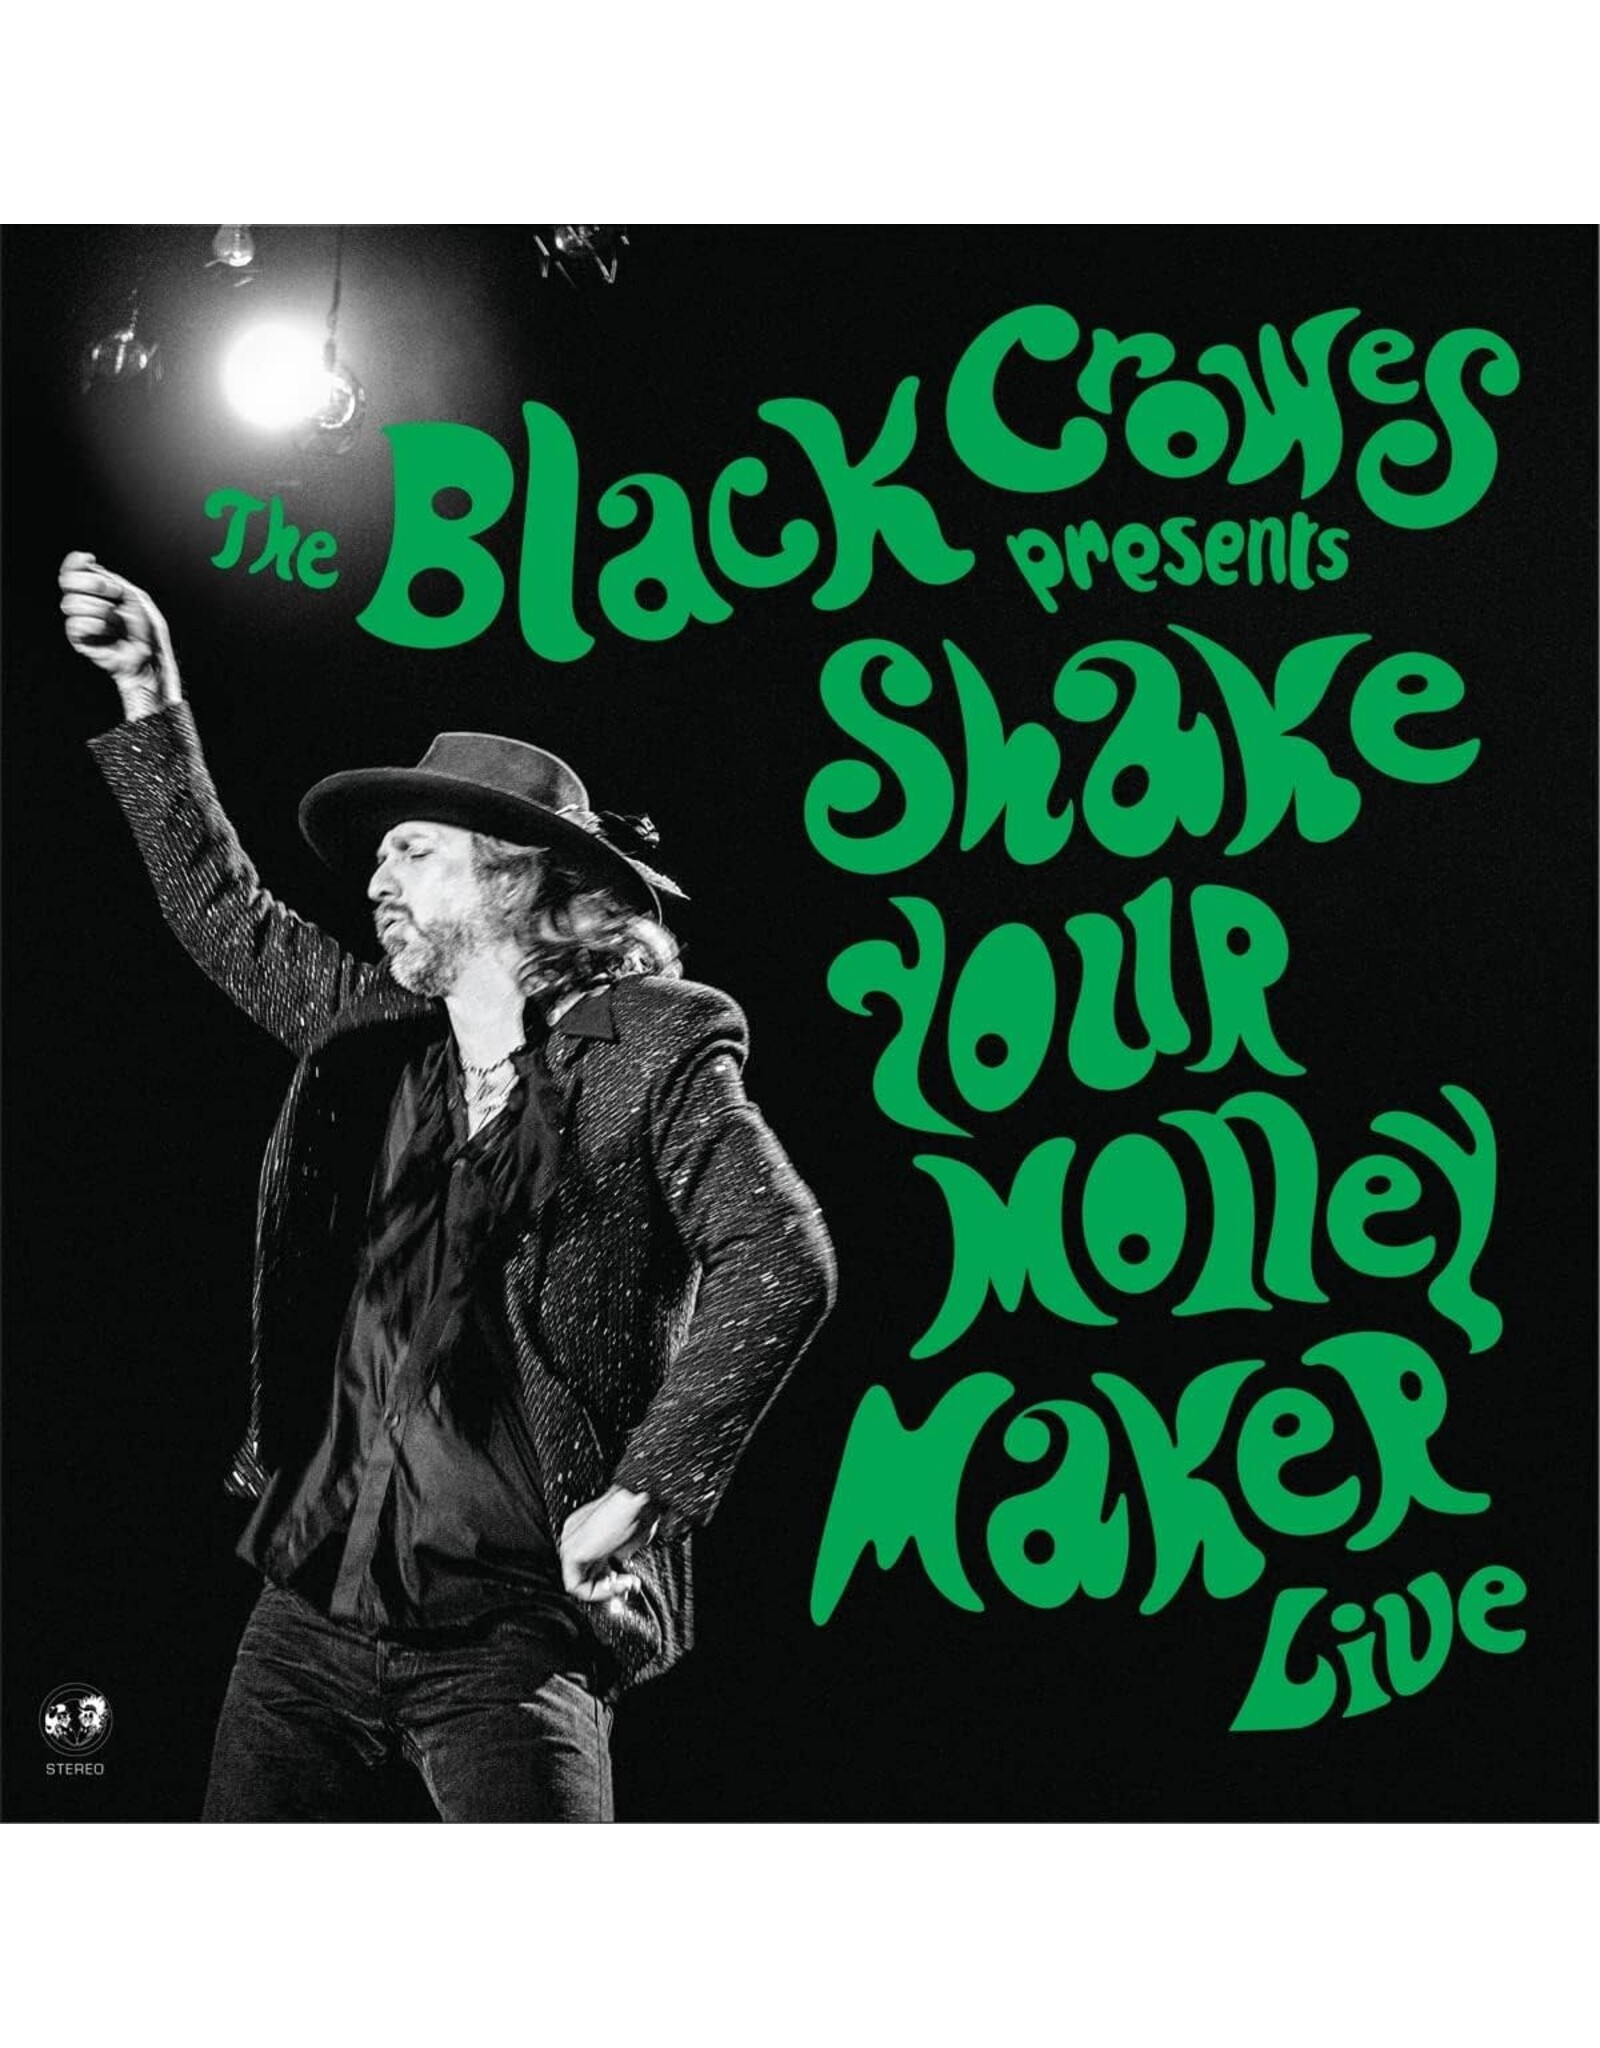 Black Crowes, the - Presents Shake Your Money Maker Live CD